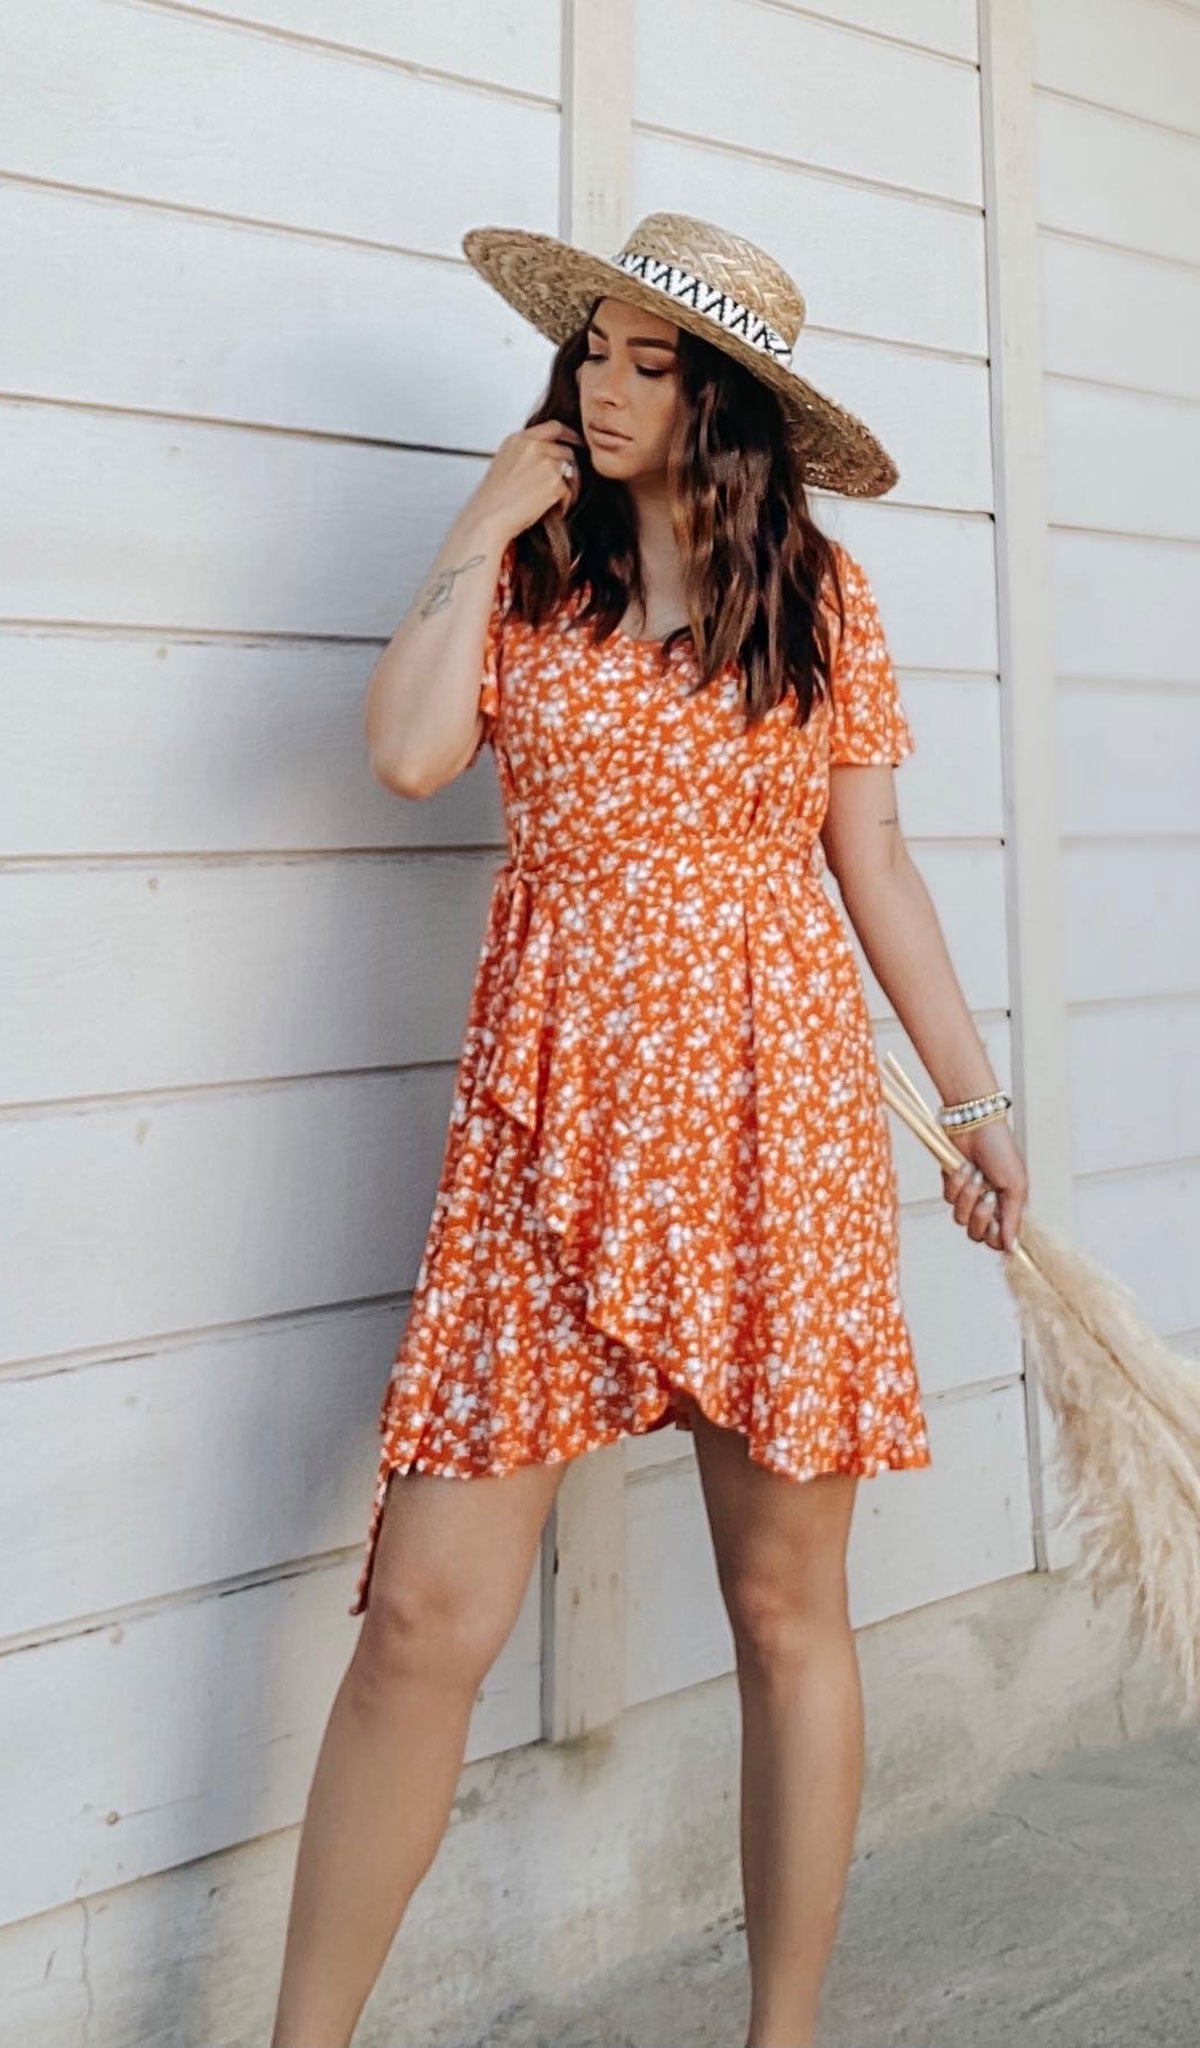 Citrus Floral Kristi Dress worn by woman wearing hat with one hand touching her hair.